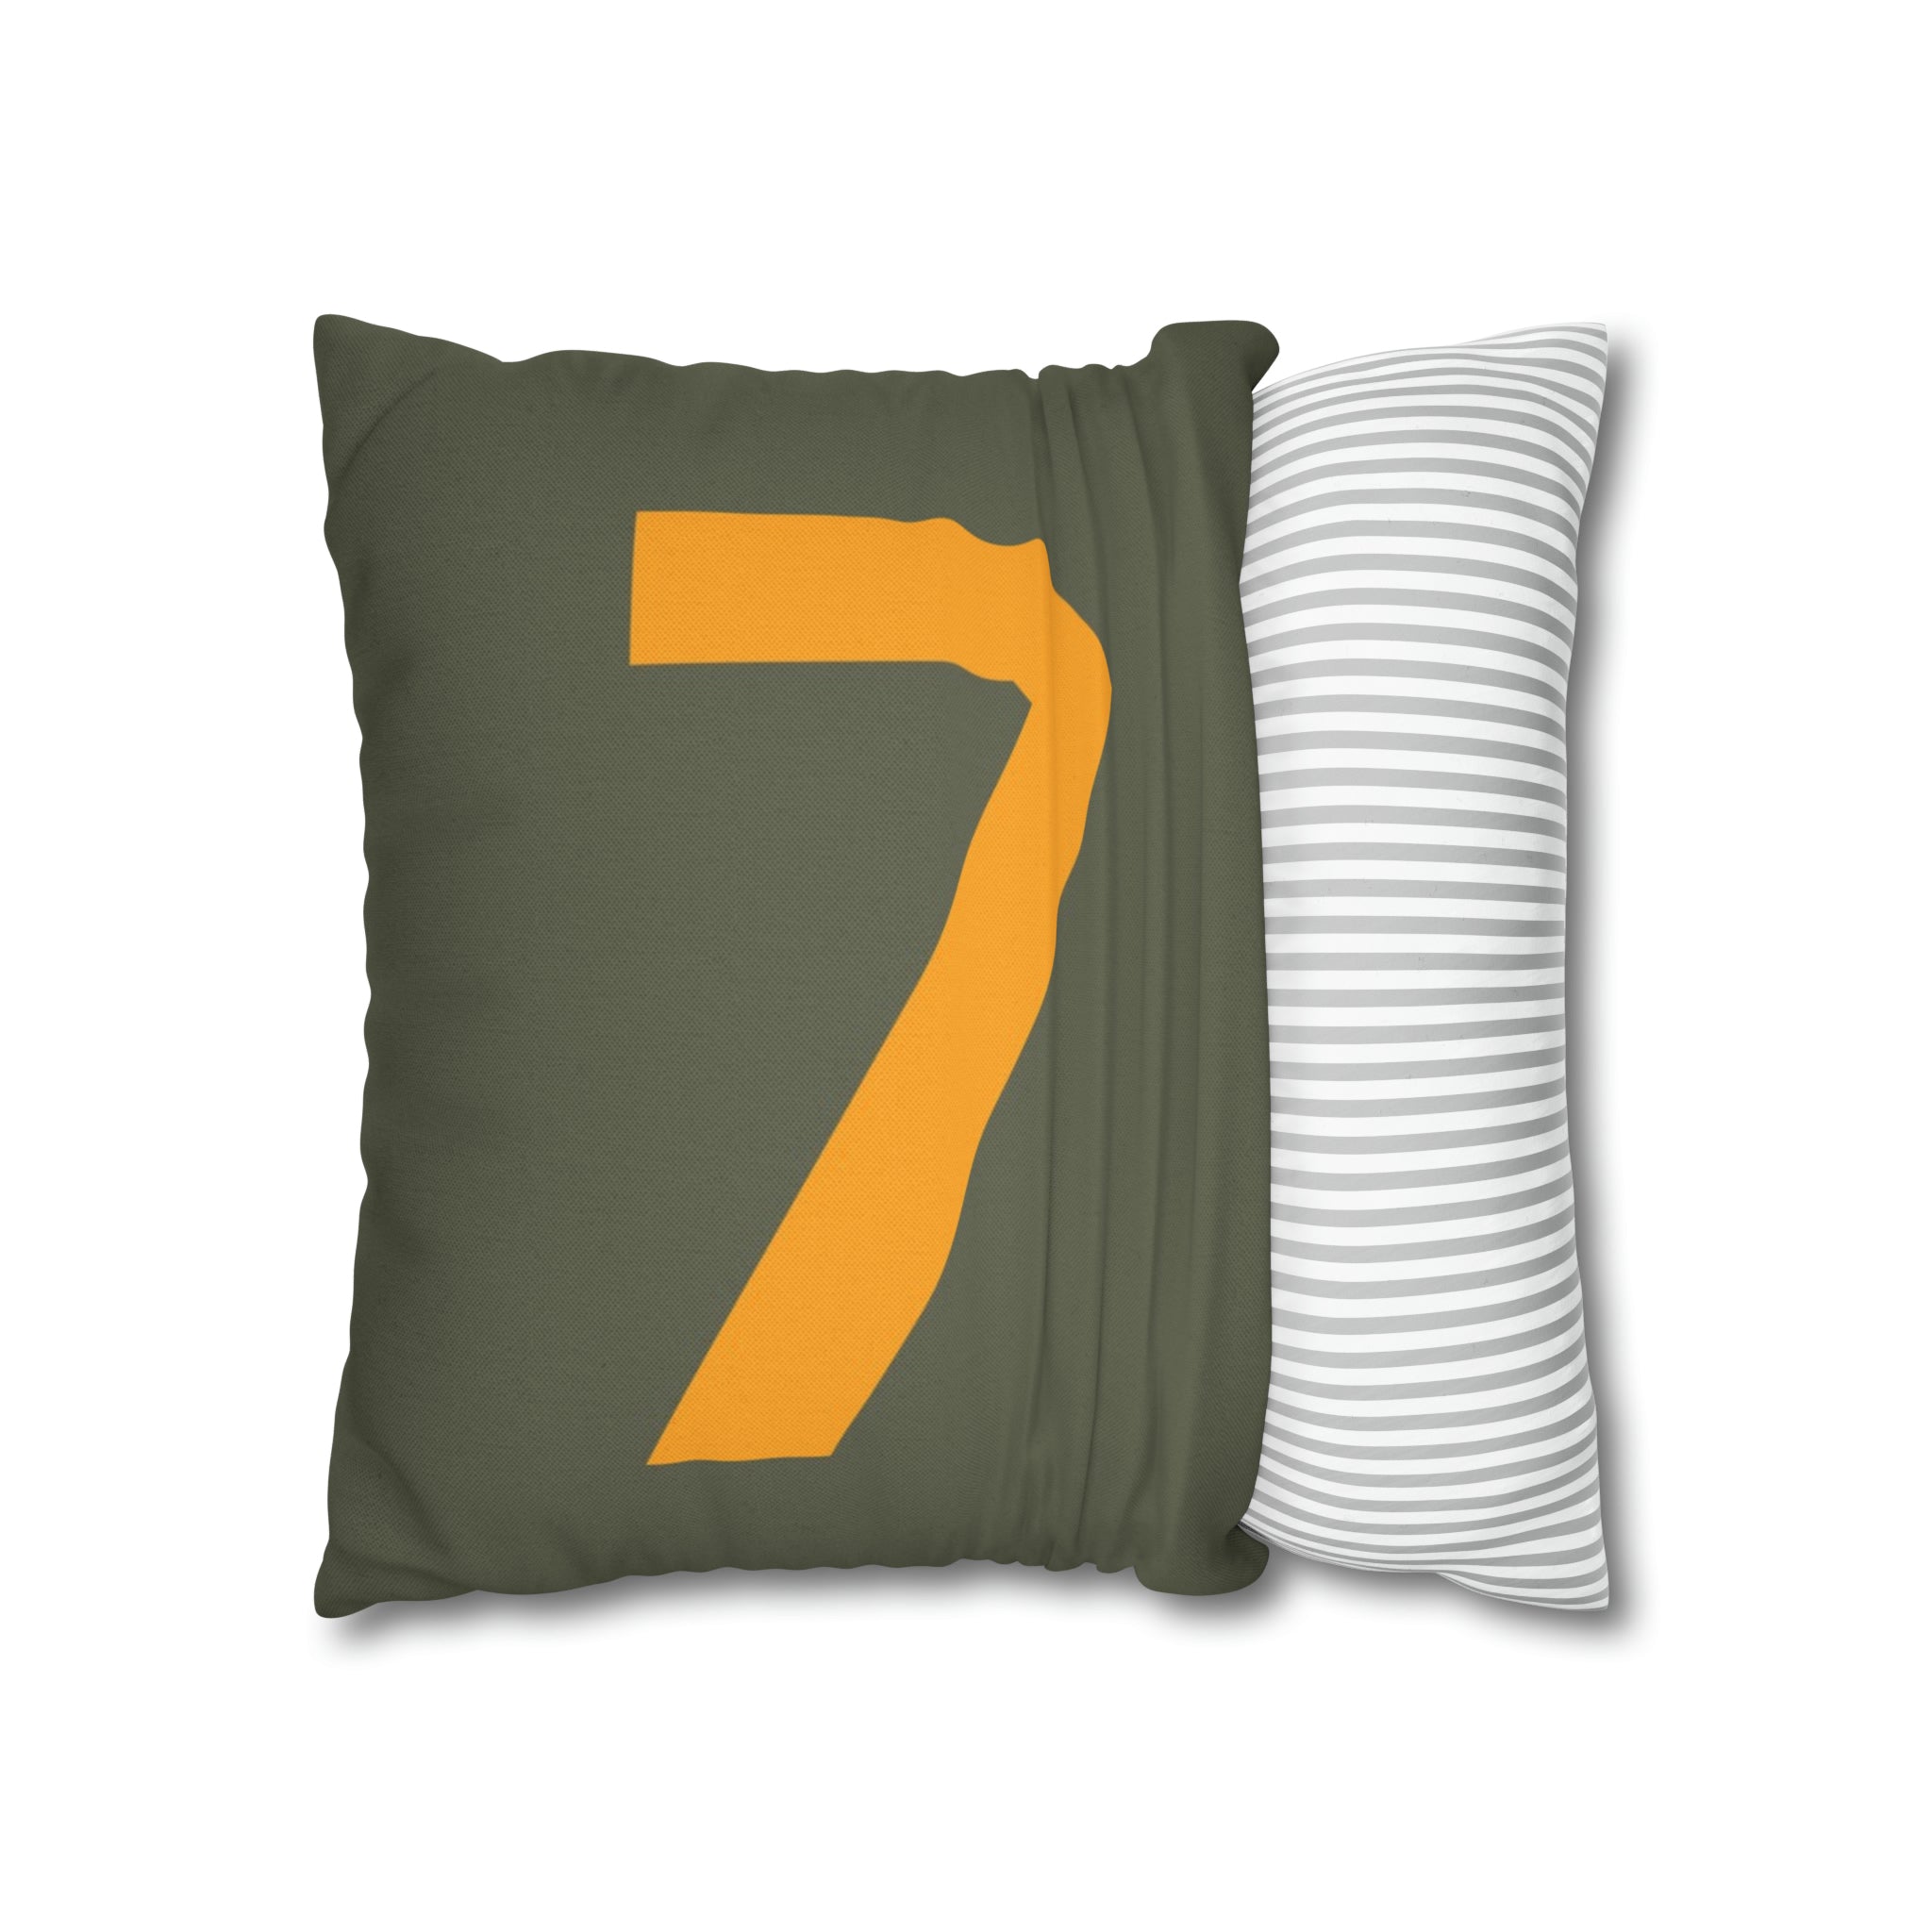 WWII USAAF Number "7" Square Pillowcase - I Love a Hangar